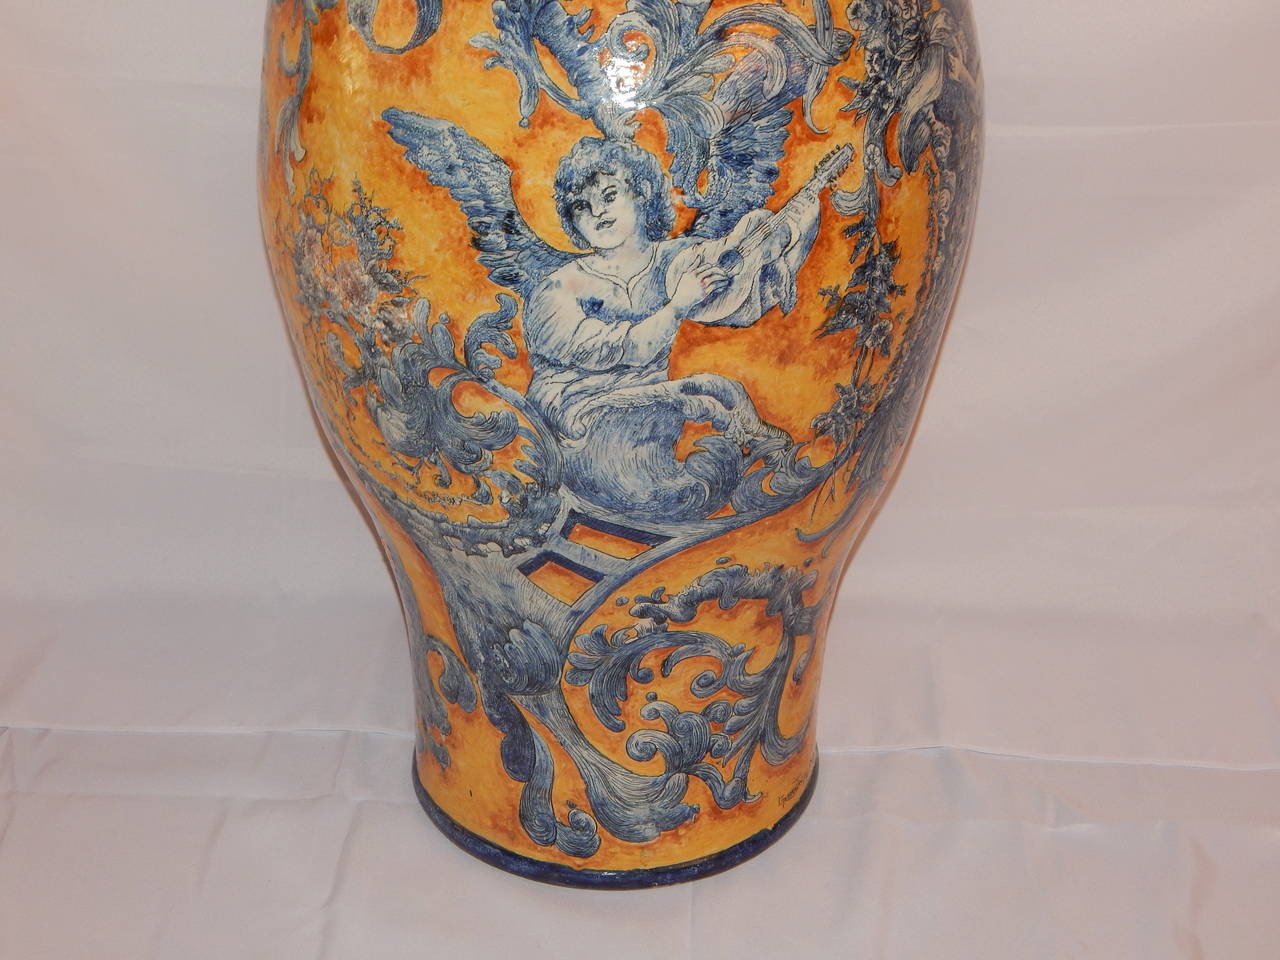 A wonderful large hand-painted faience floor vase, with cover, hand-painted with different cherubs or angels, playing music, signed.